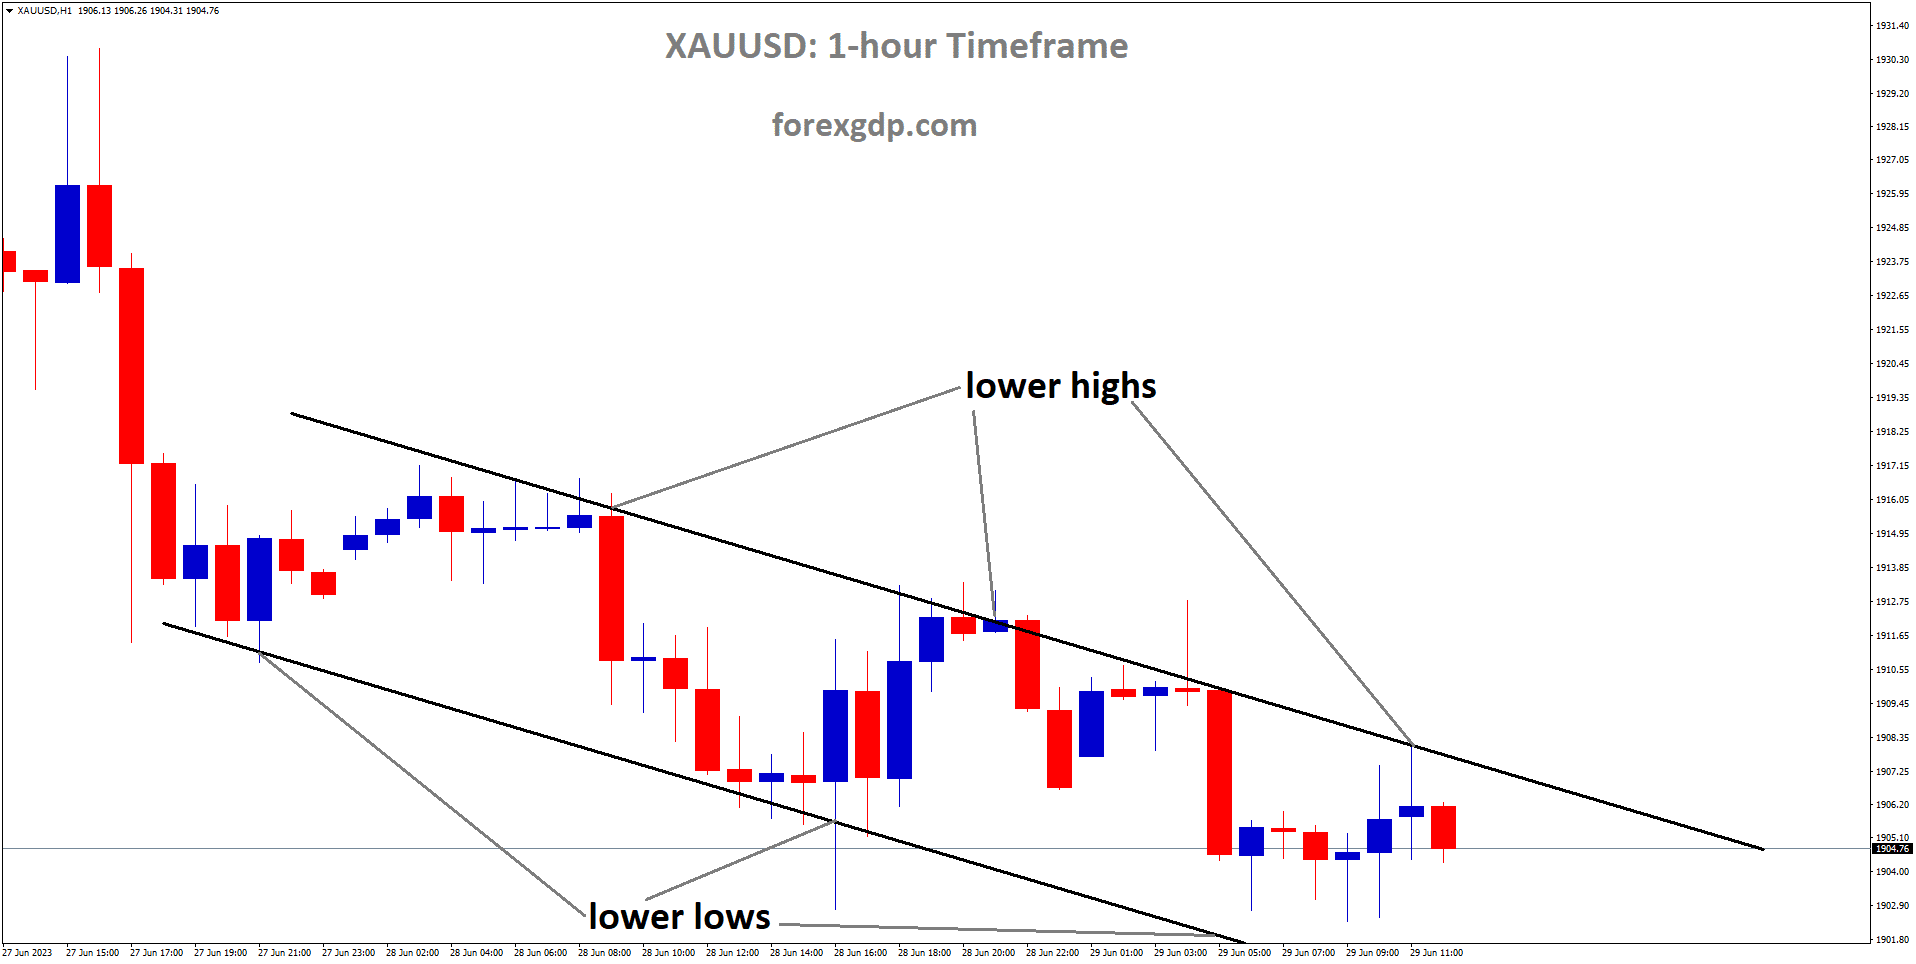 XAUUSD is moving in Descending channel and the market has reached the higher low area of the channel.